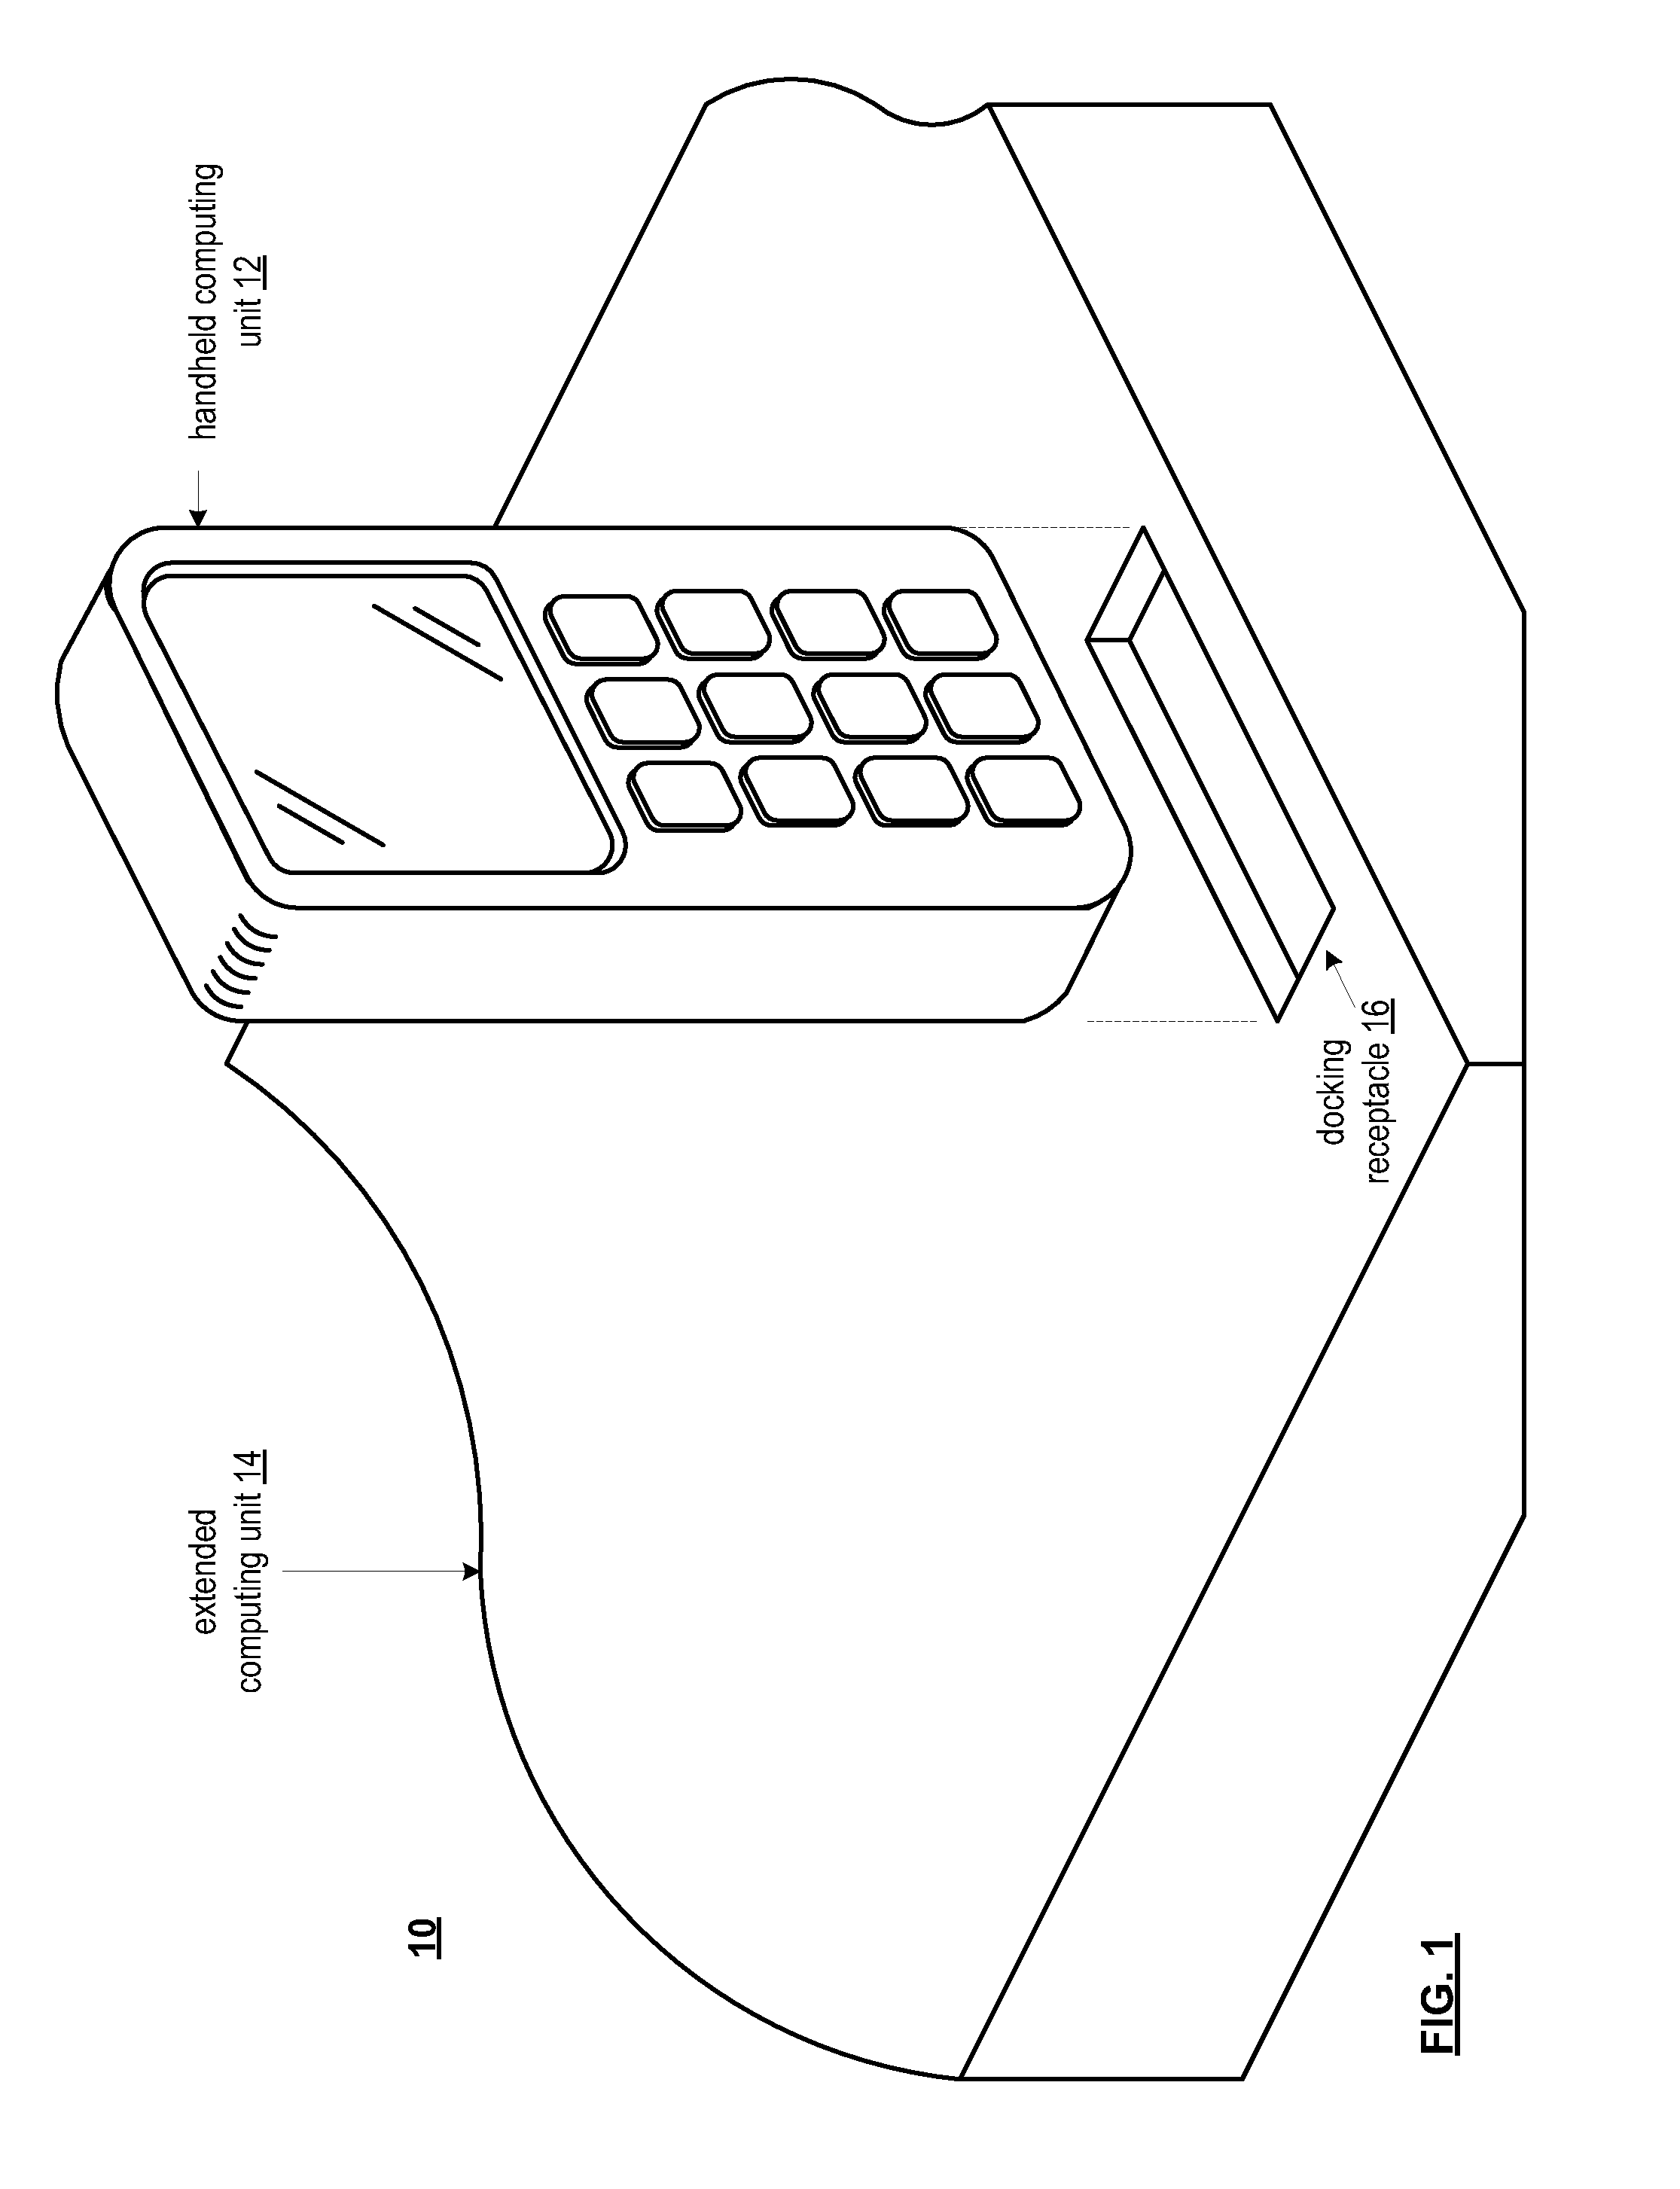 BIOS for a computing device with handheld and extended computing units